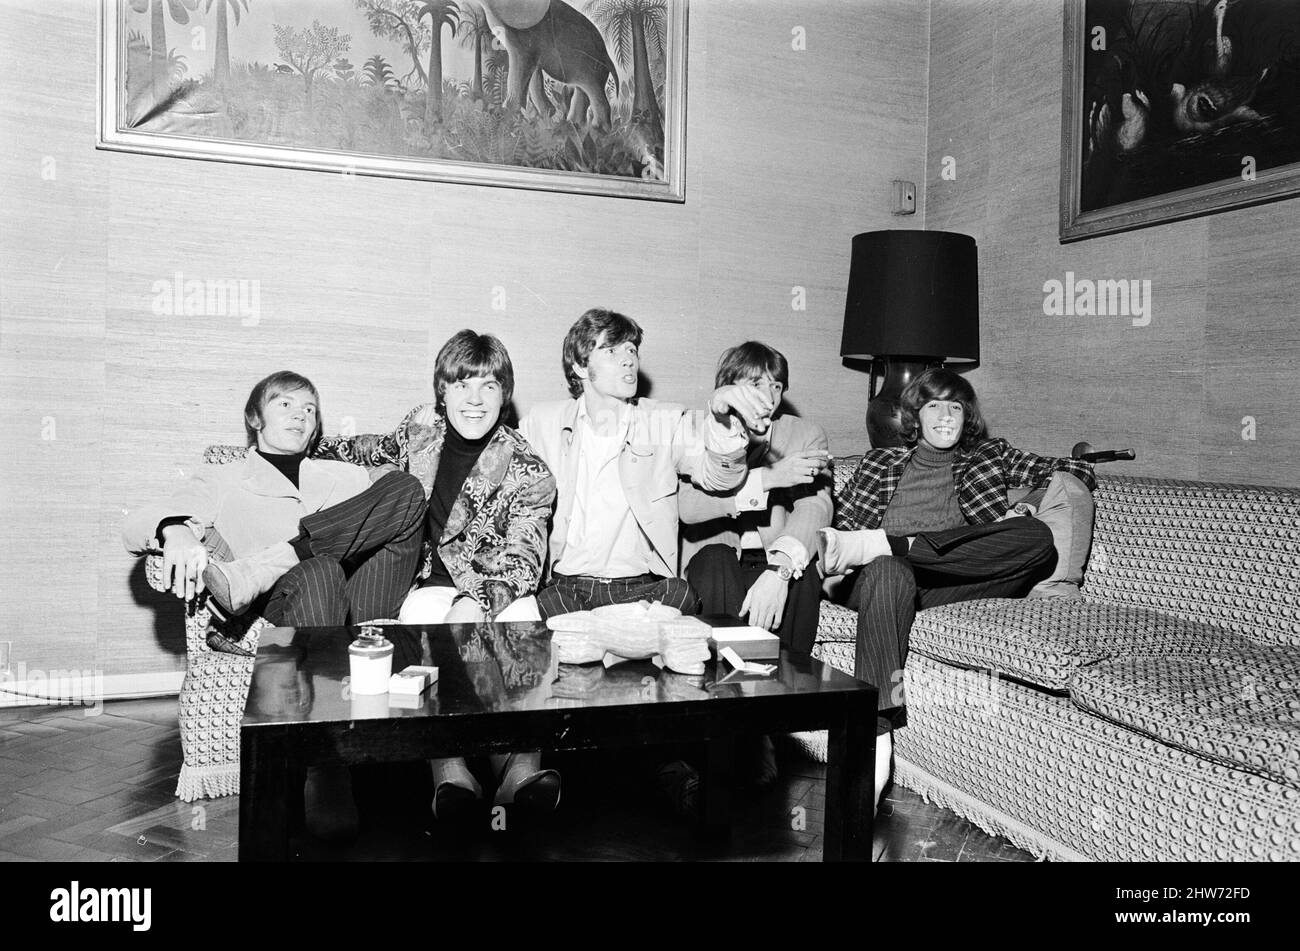 The Bee Gees seen here watching television in their hotel room 17th October 1967.   The Bee Gees is a 5 member group, comprising of Barry Gibb, Maurice Gibb, Robin Gibb, Colin Peterson & Vince Melouney *** Local Caption *** Colin Peterson  Vince Melouney Stock Photo